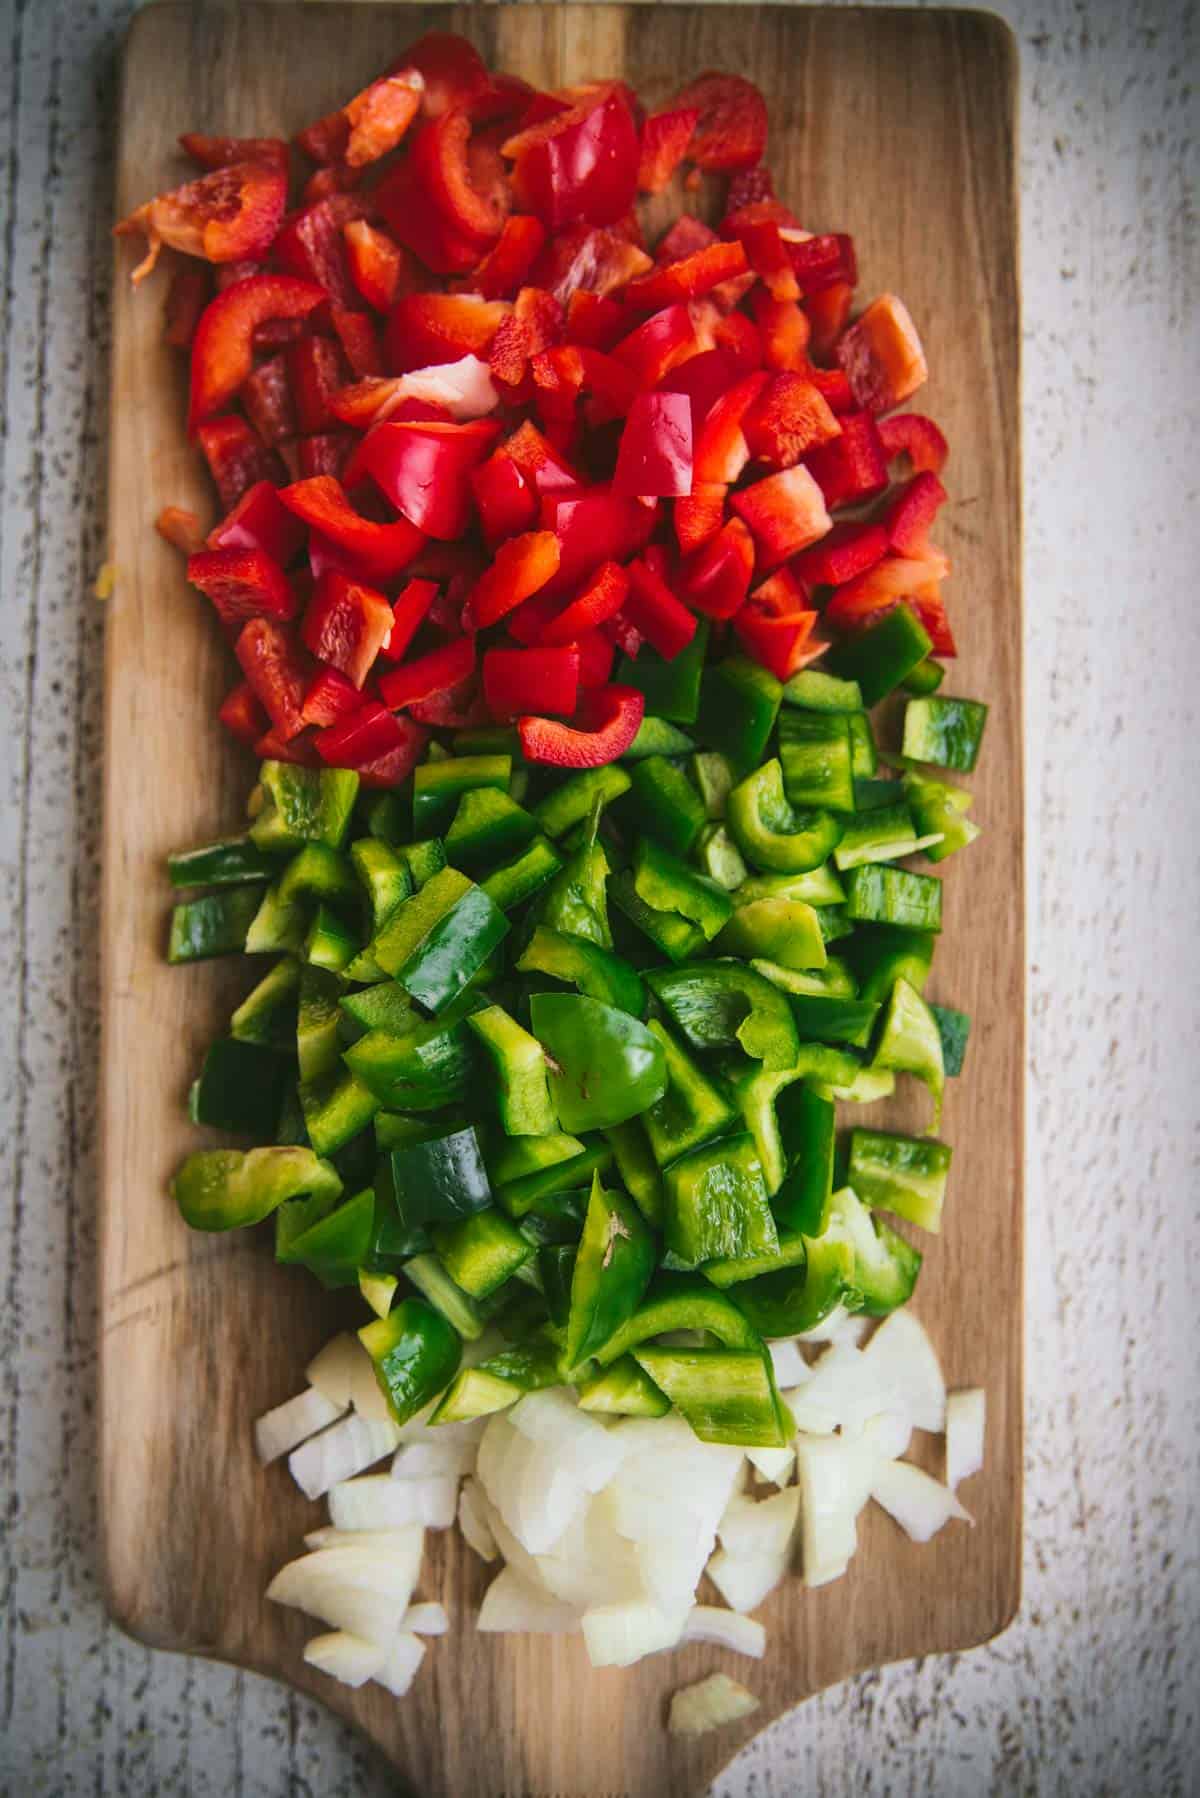 On a wooden chopping board with a handle, red pepper, green pepper and onion have been diced and are laying next to each other on the board.